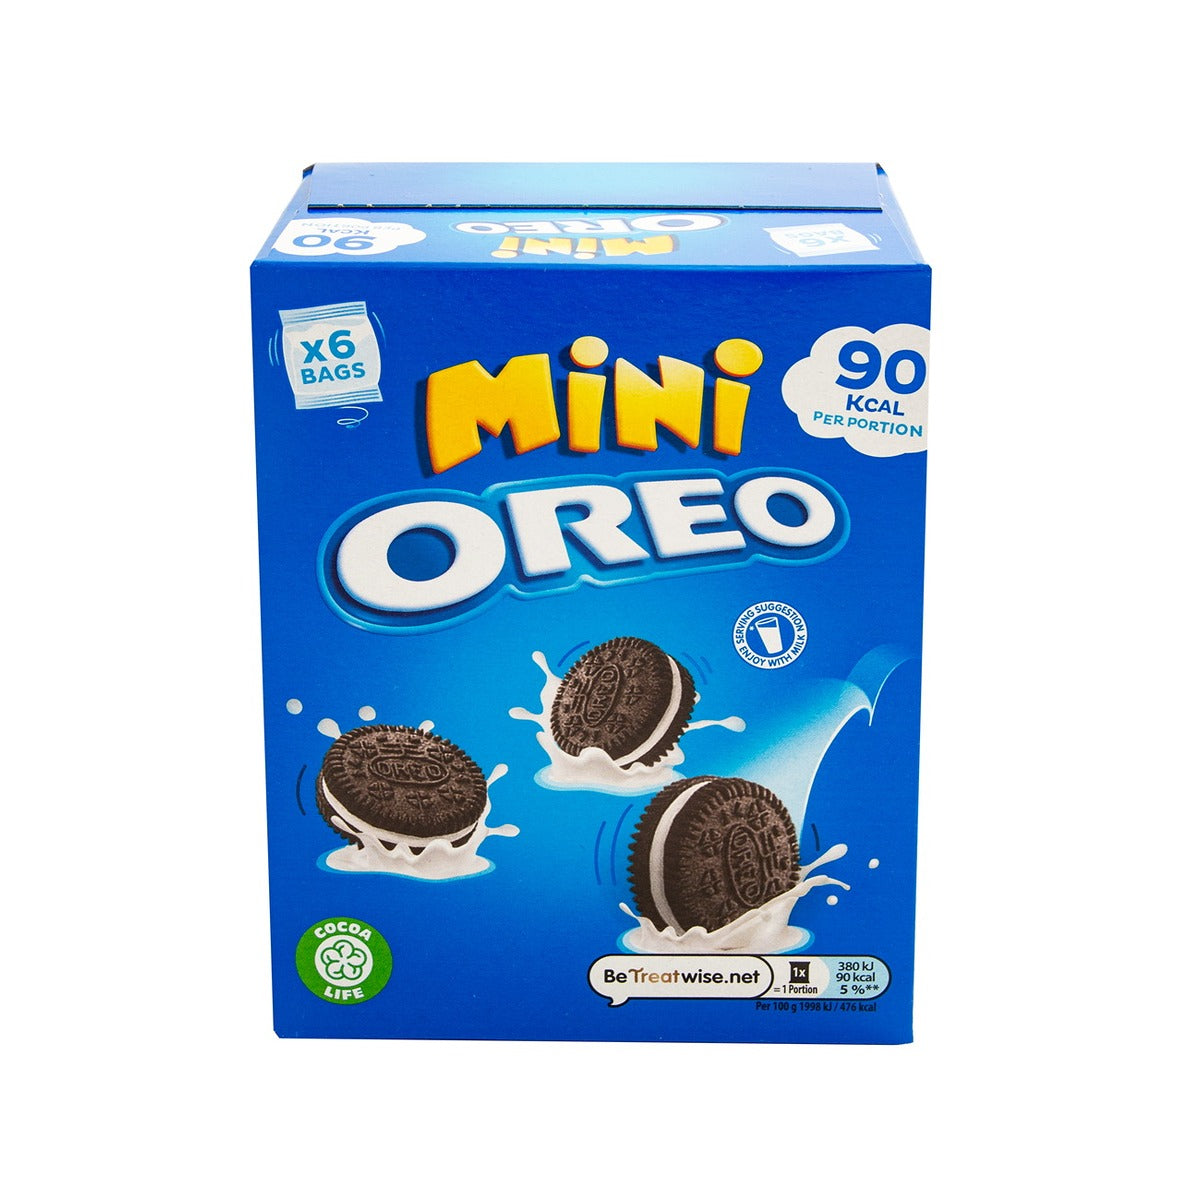 Oreo - Mini Cookies 6 Bags - 114g - Continental Food Store